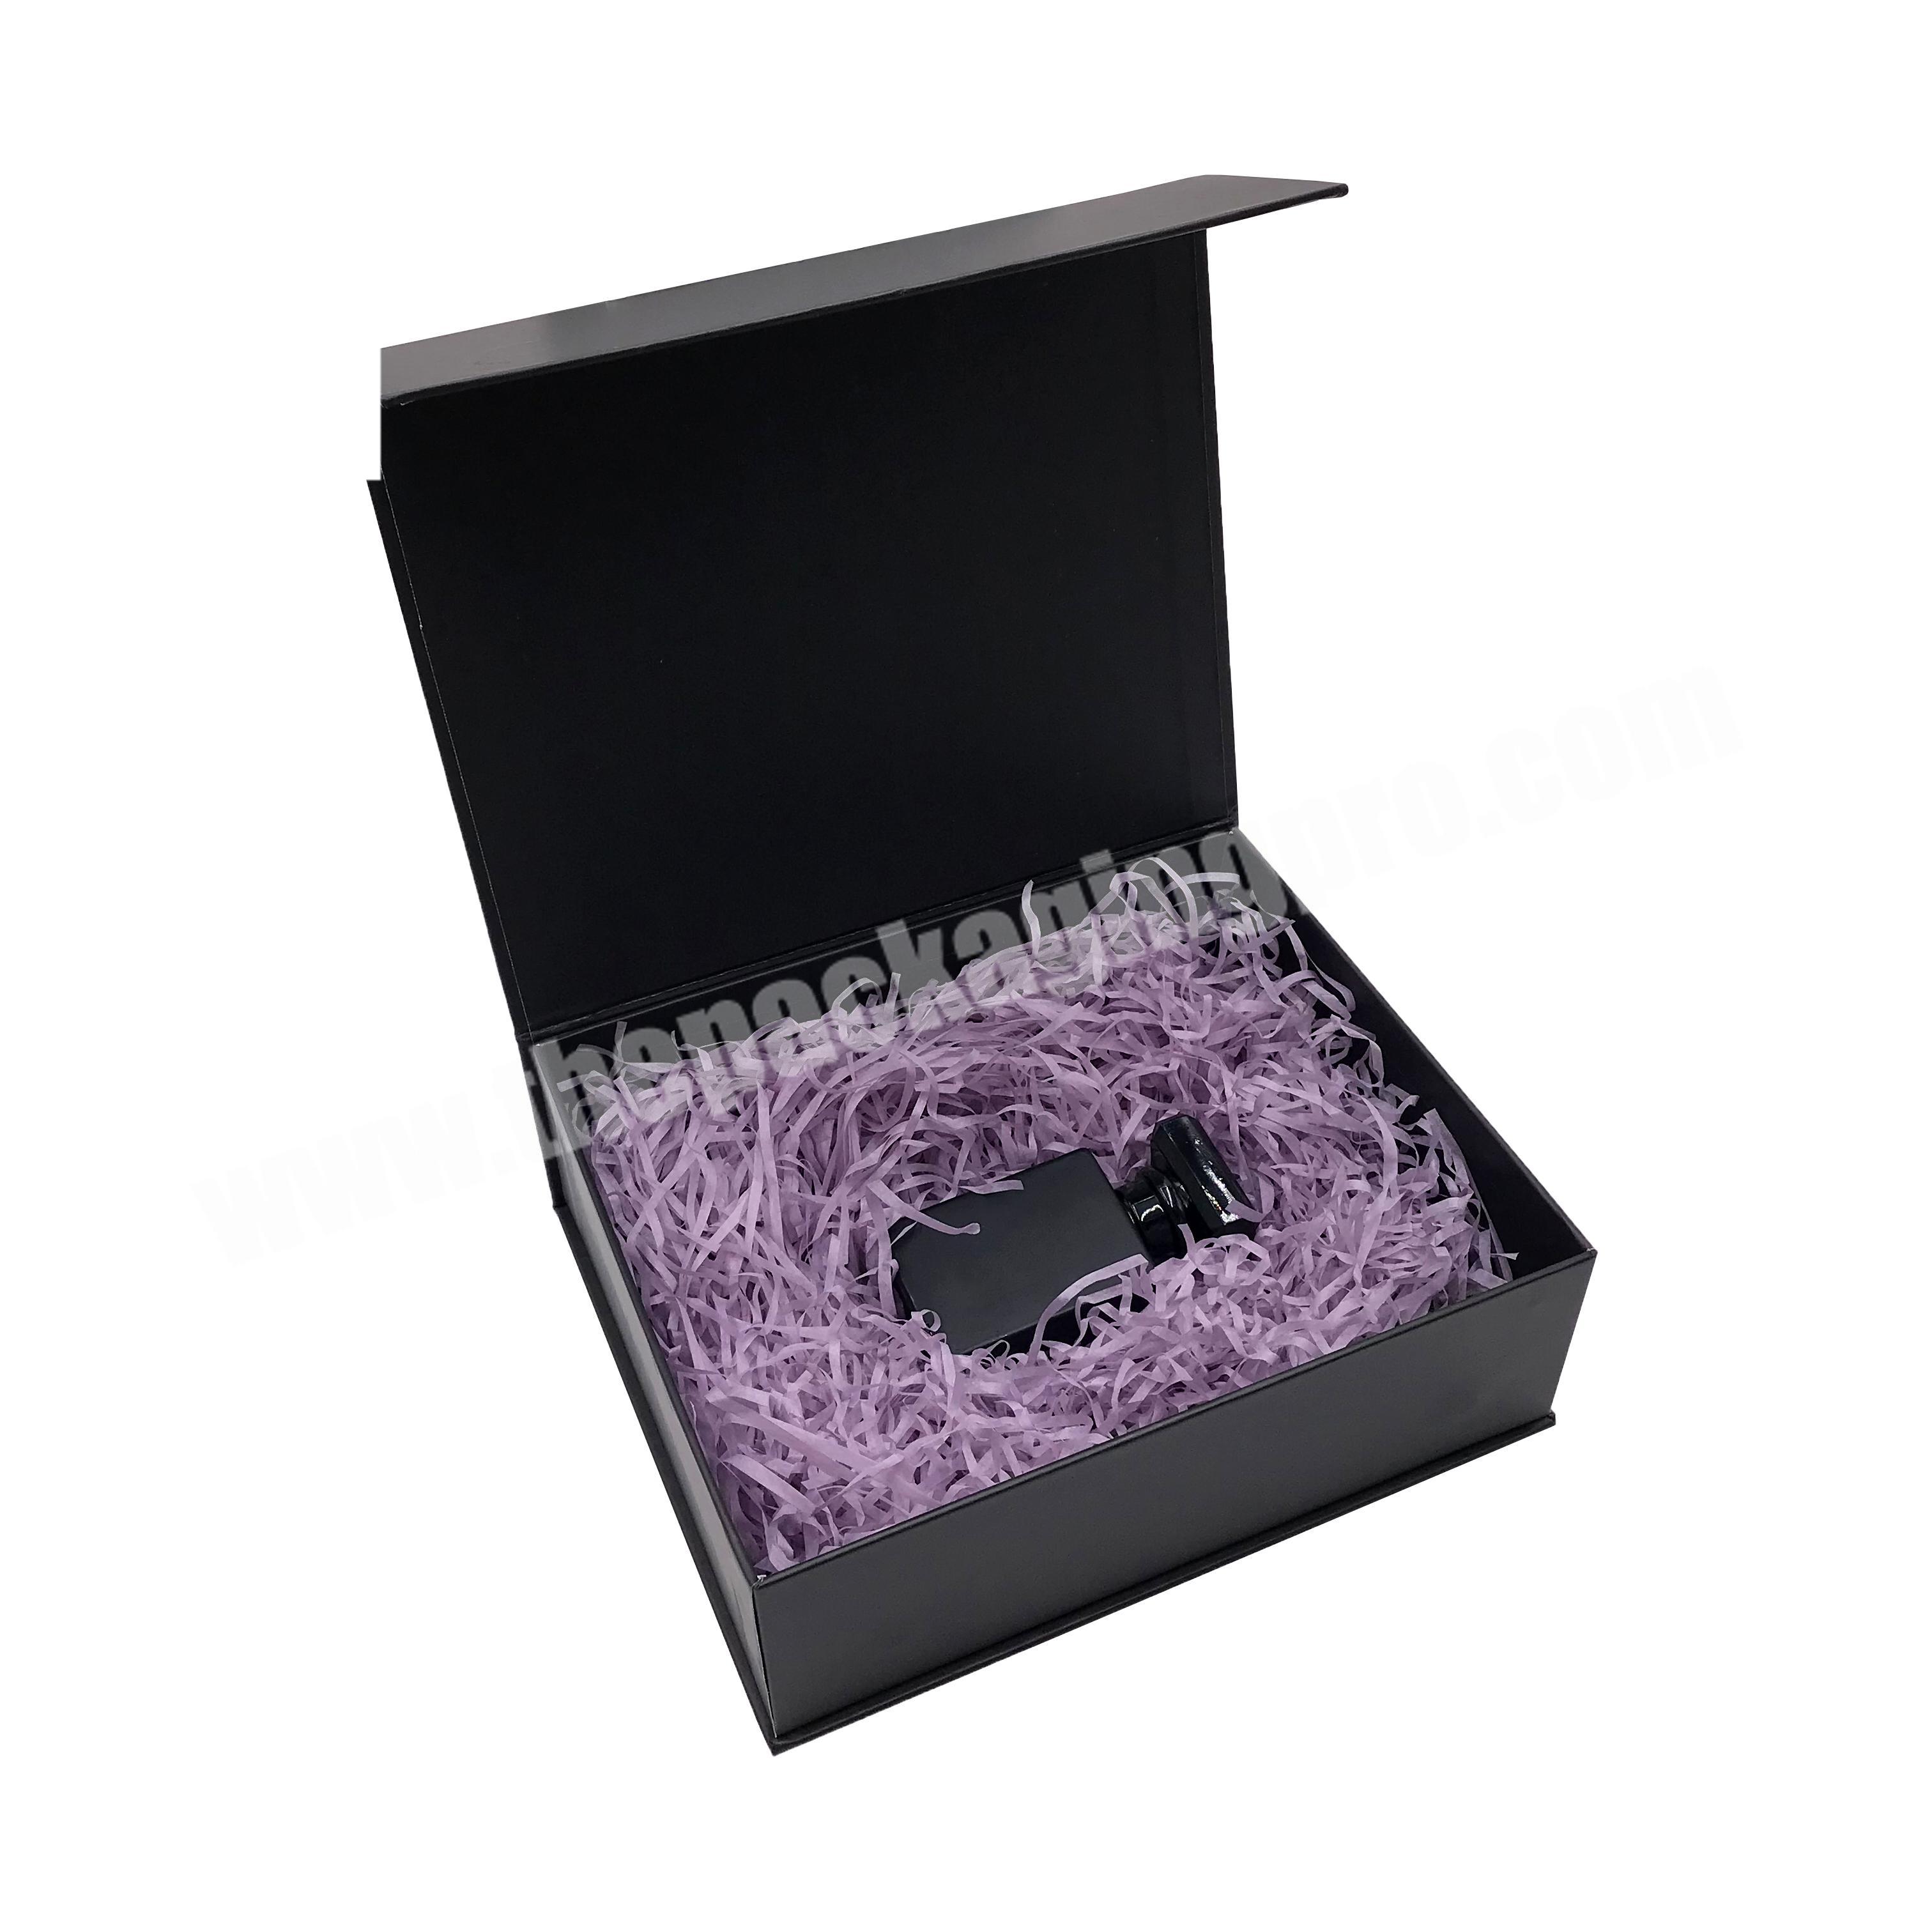 made in china printed gift box package handmade electronic gift packaging watch box gift